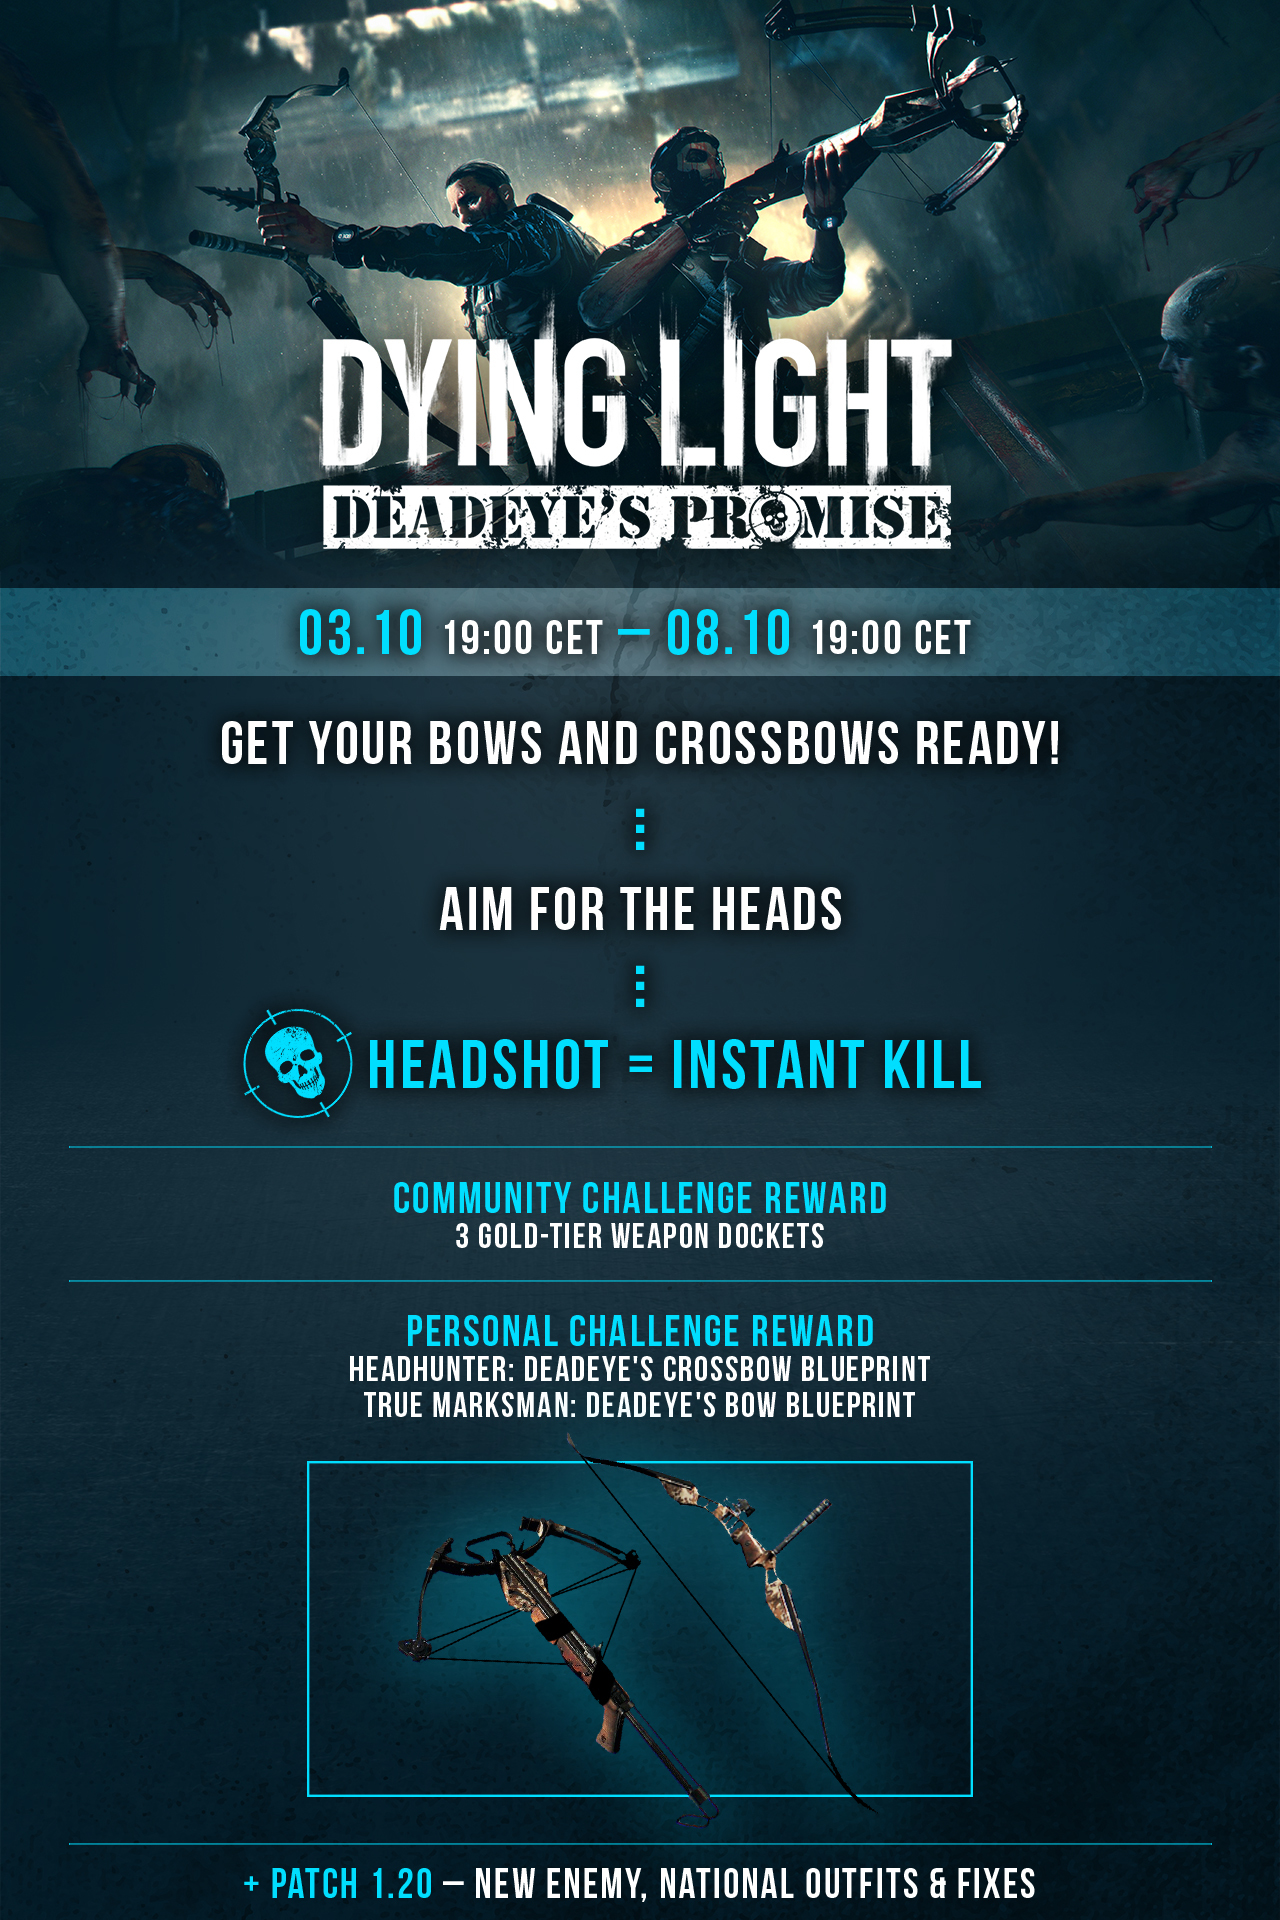 Dec 6, 2019 Dying Light x Chivalry Event Dying Light - nirth_techland Dying  Light goes medieval with Chivalry crossover event Warriors of Harran, we  call upon you to rise in great numbers against the evil swarming our realm.  As you travel the land, you will ...